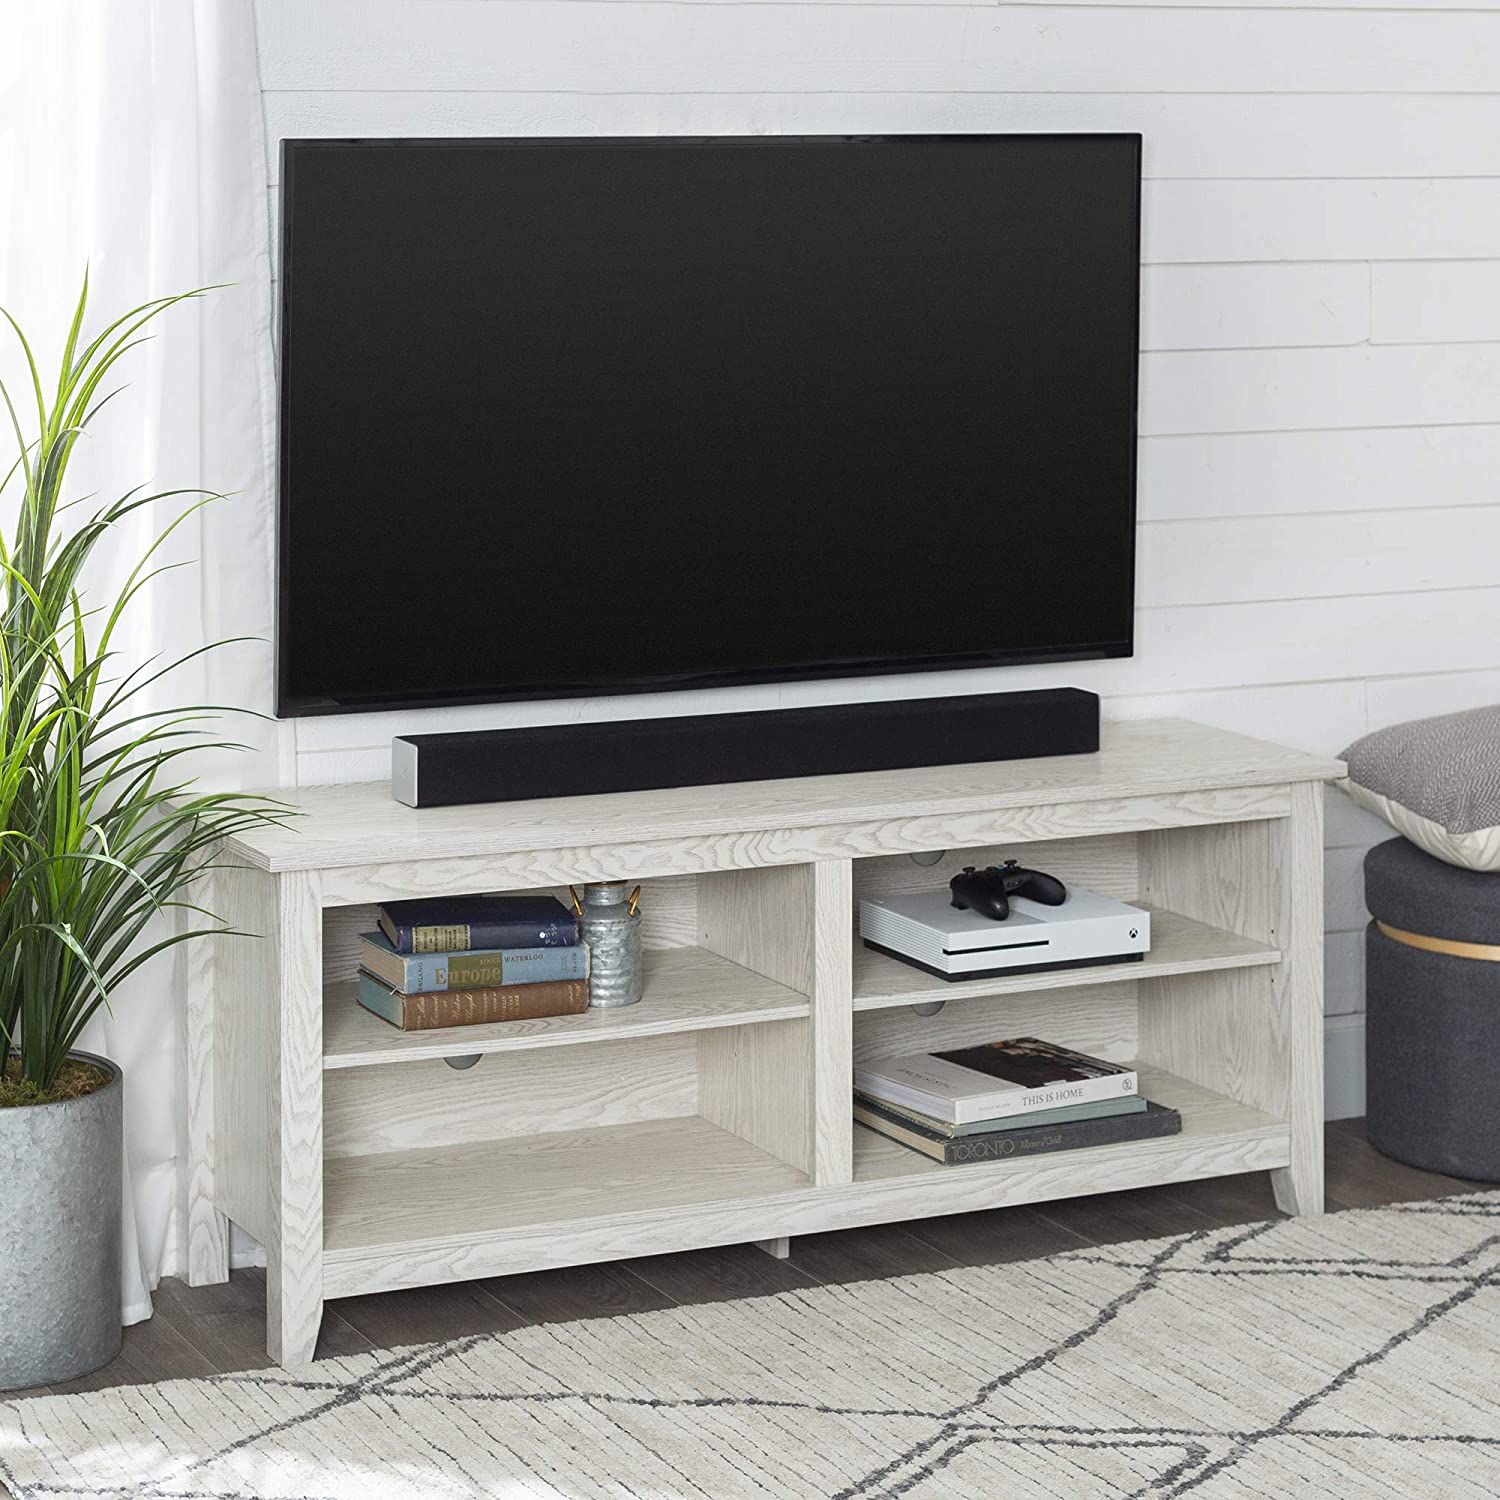 Walker Edison Furniture: 60" 2-Shelf Industrial Wood Metal Bookcase $85, Wren Classic 4-Cubby TV Stand (up to 65") $83 & More + Free S&H